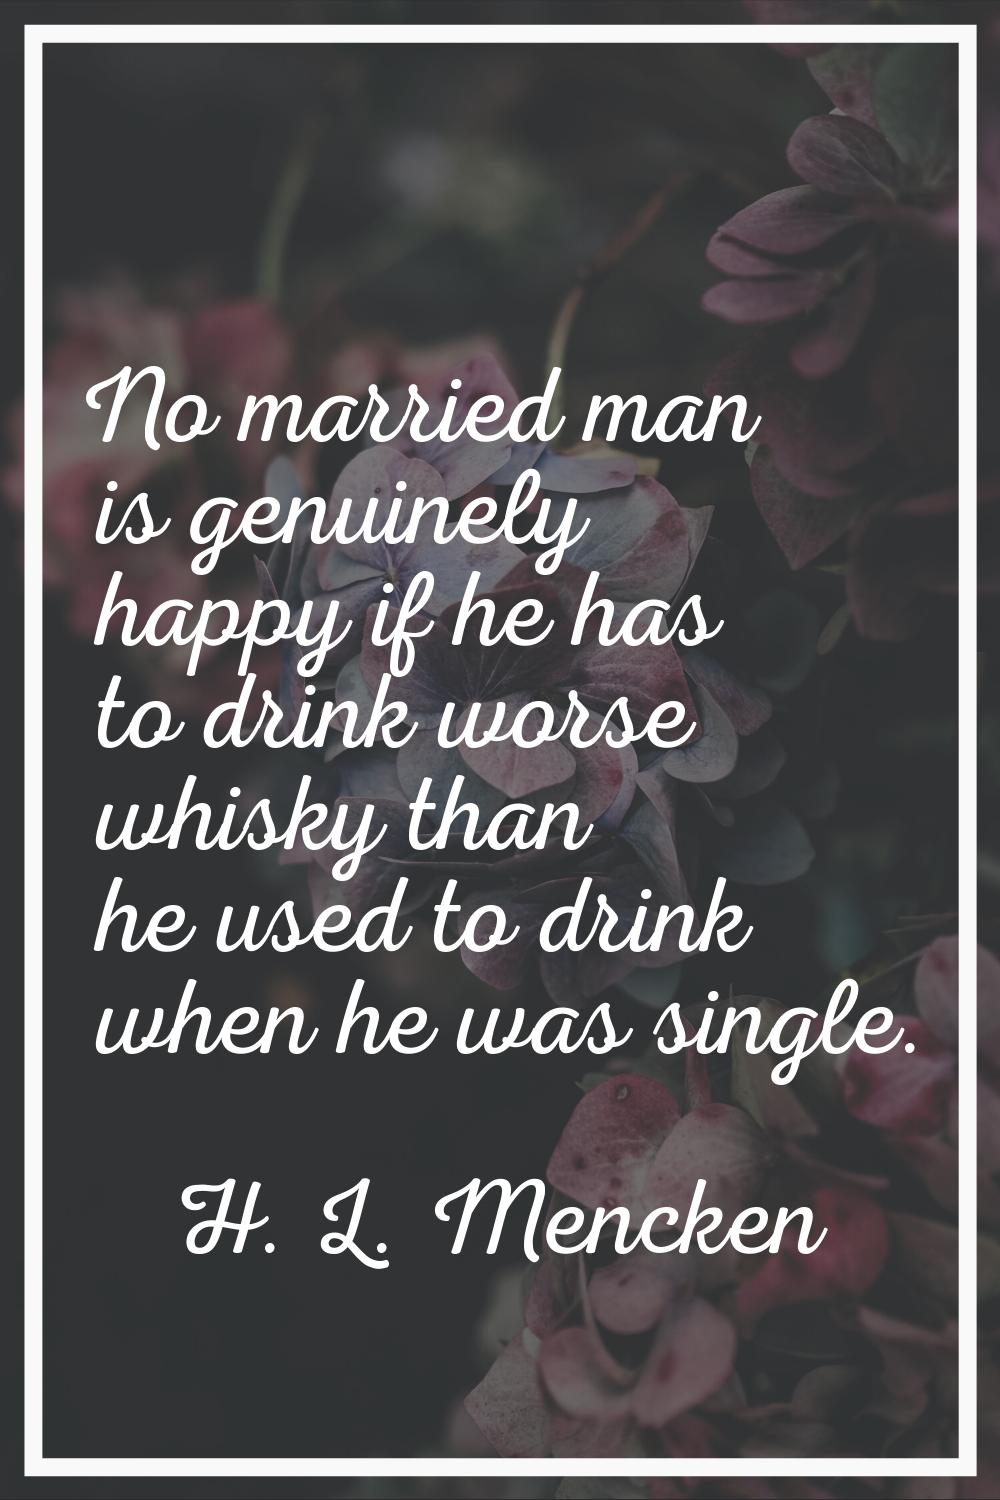 No married man is genuinely happy if he has to drink worse whisky than he used to drink when he was